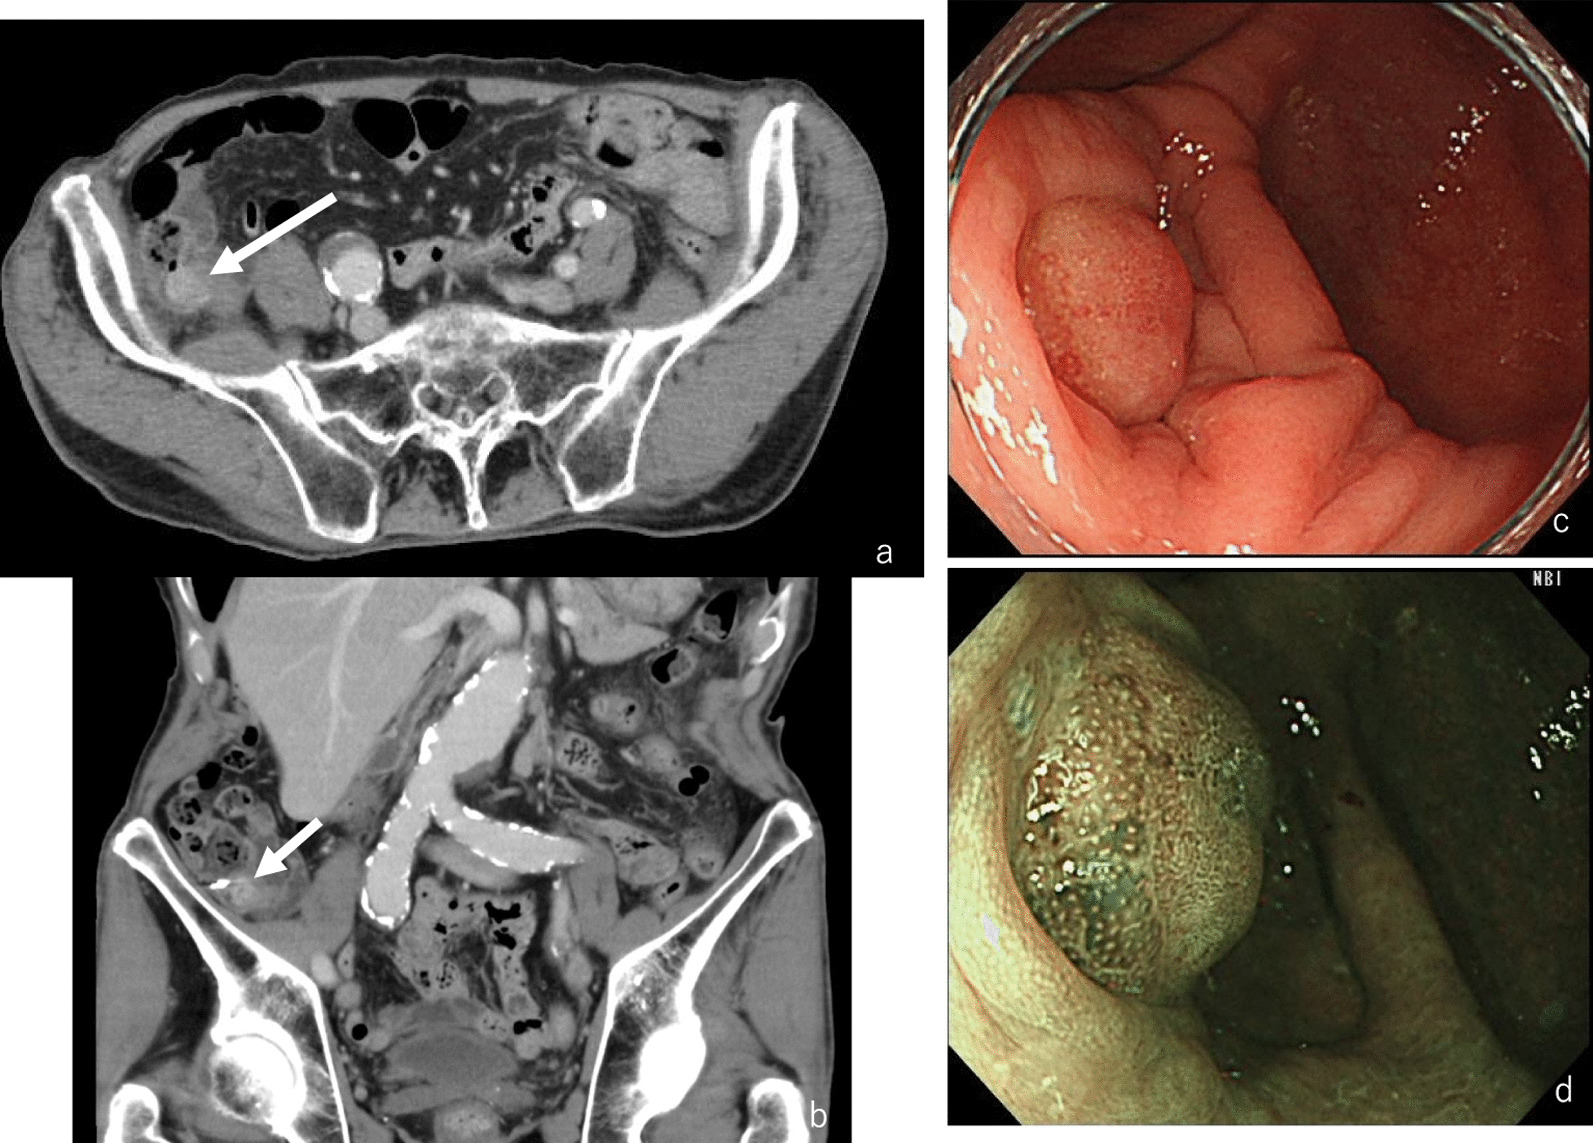 Appendiceal goblet cell adenocarcinoma newly classified by WHO 5th edition: a case report (a secondary publication)